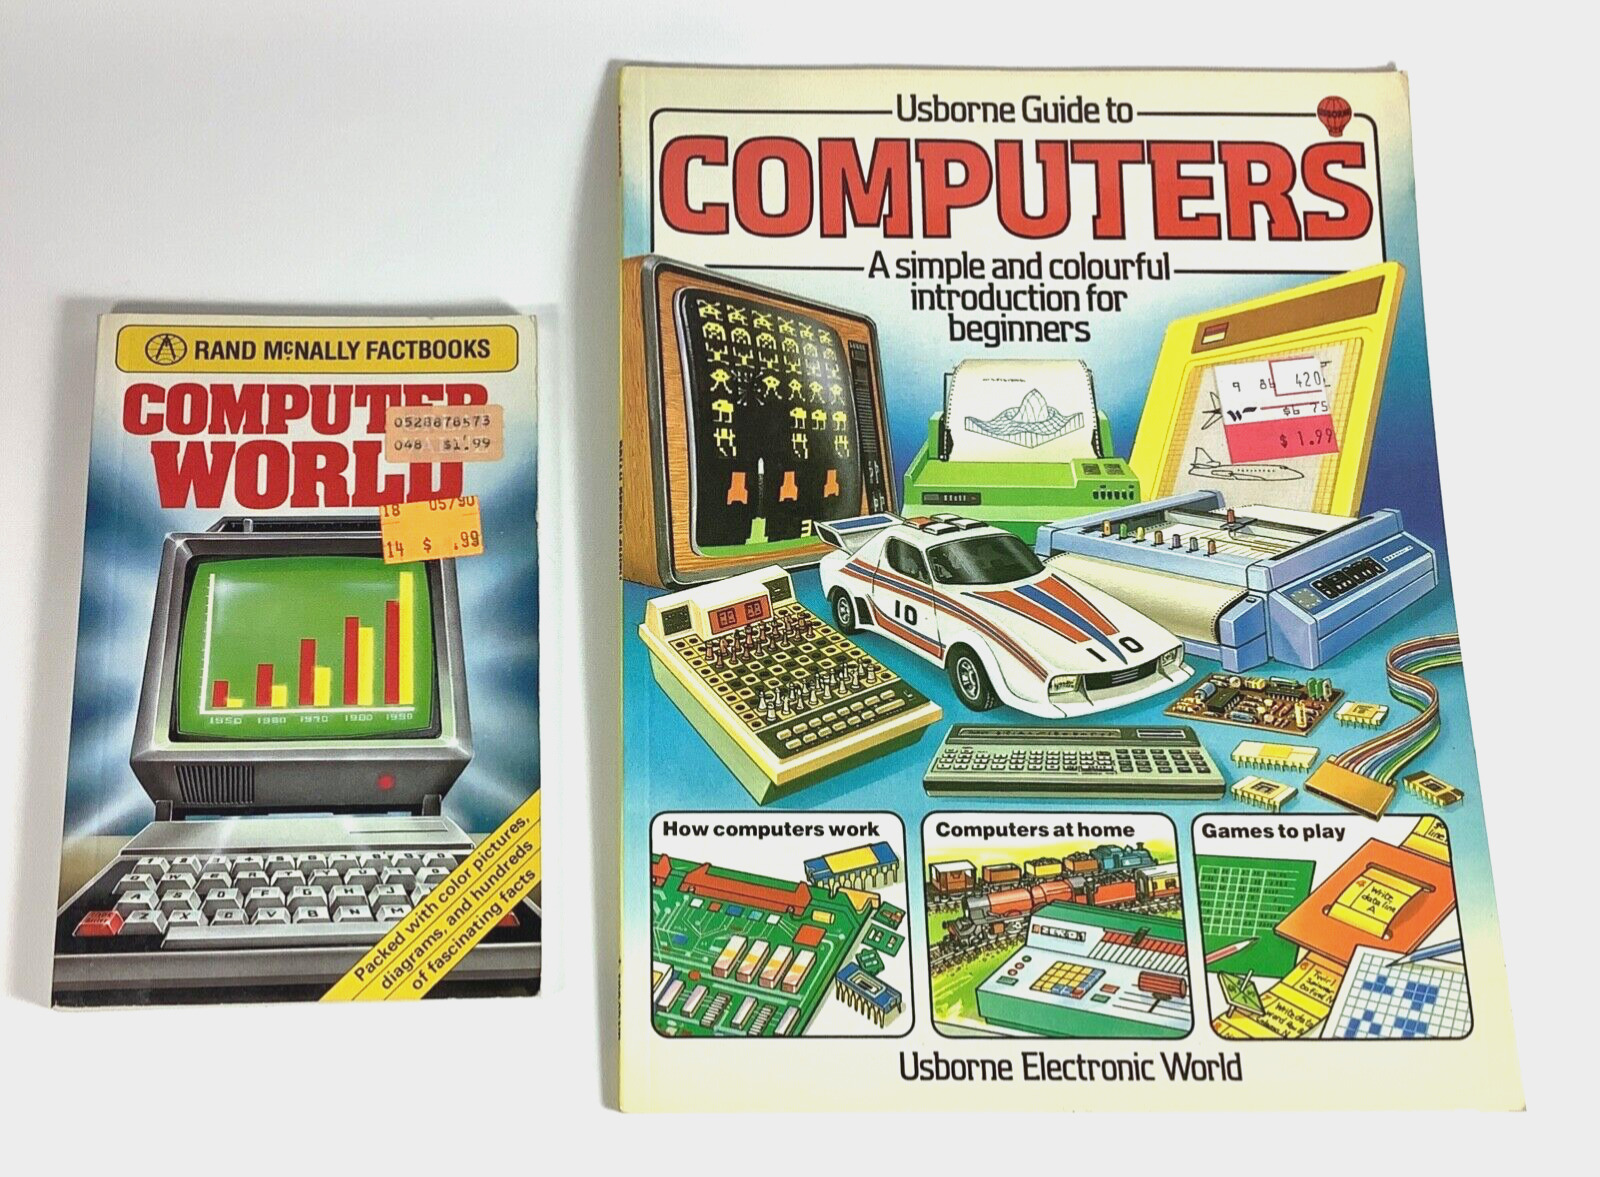 Vintage Computer Books Usborne Guide to Computers & Computer World, Rand McNally